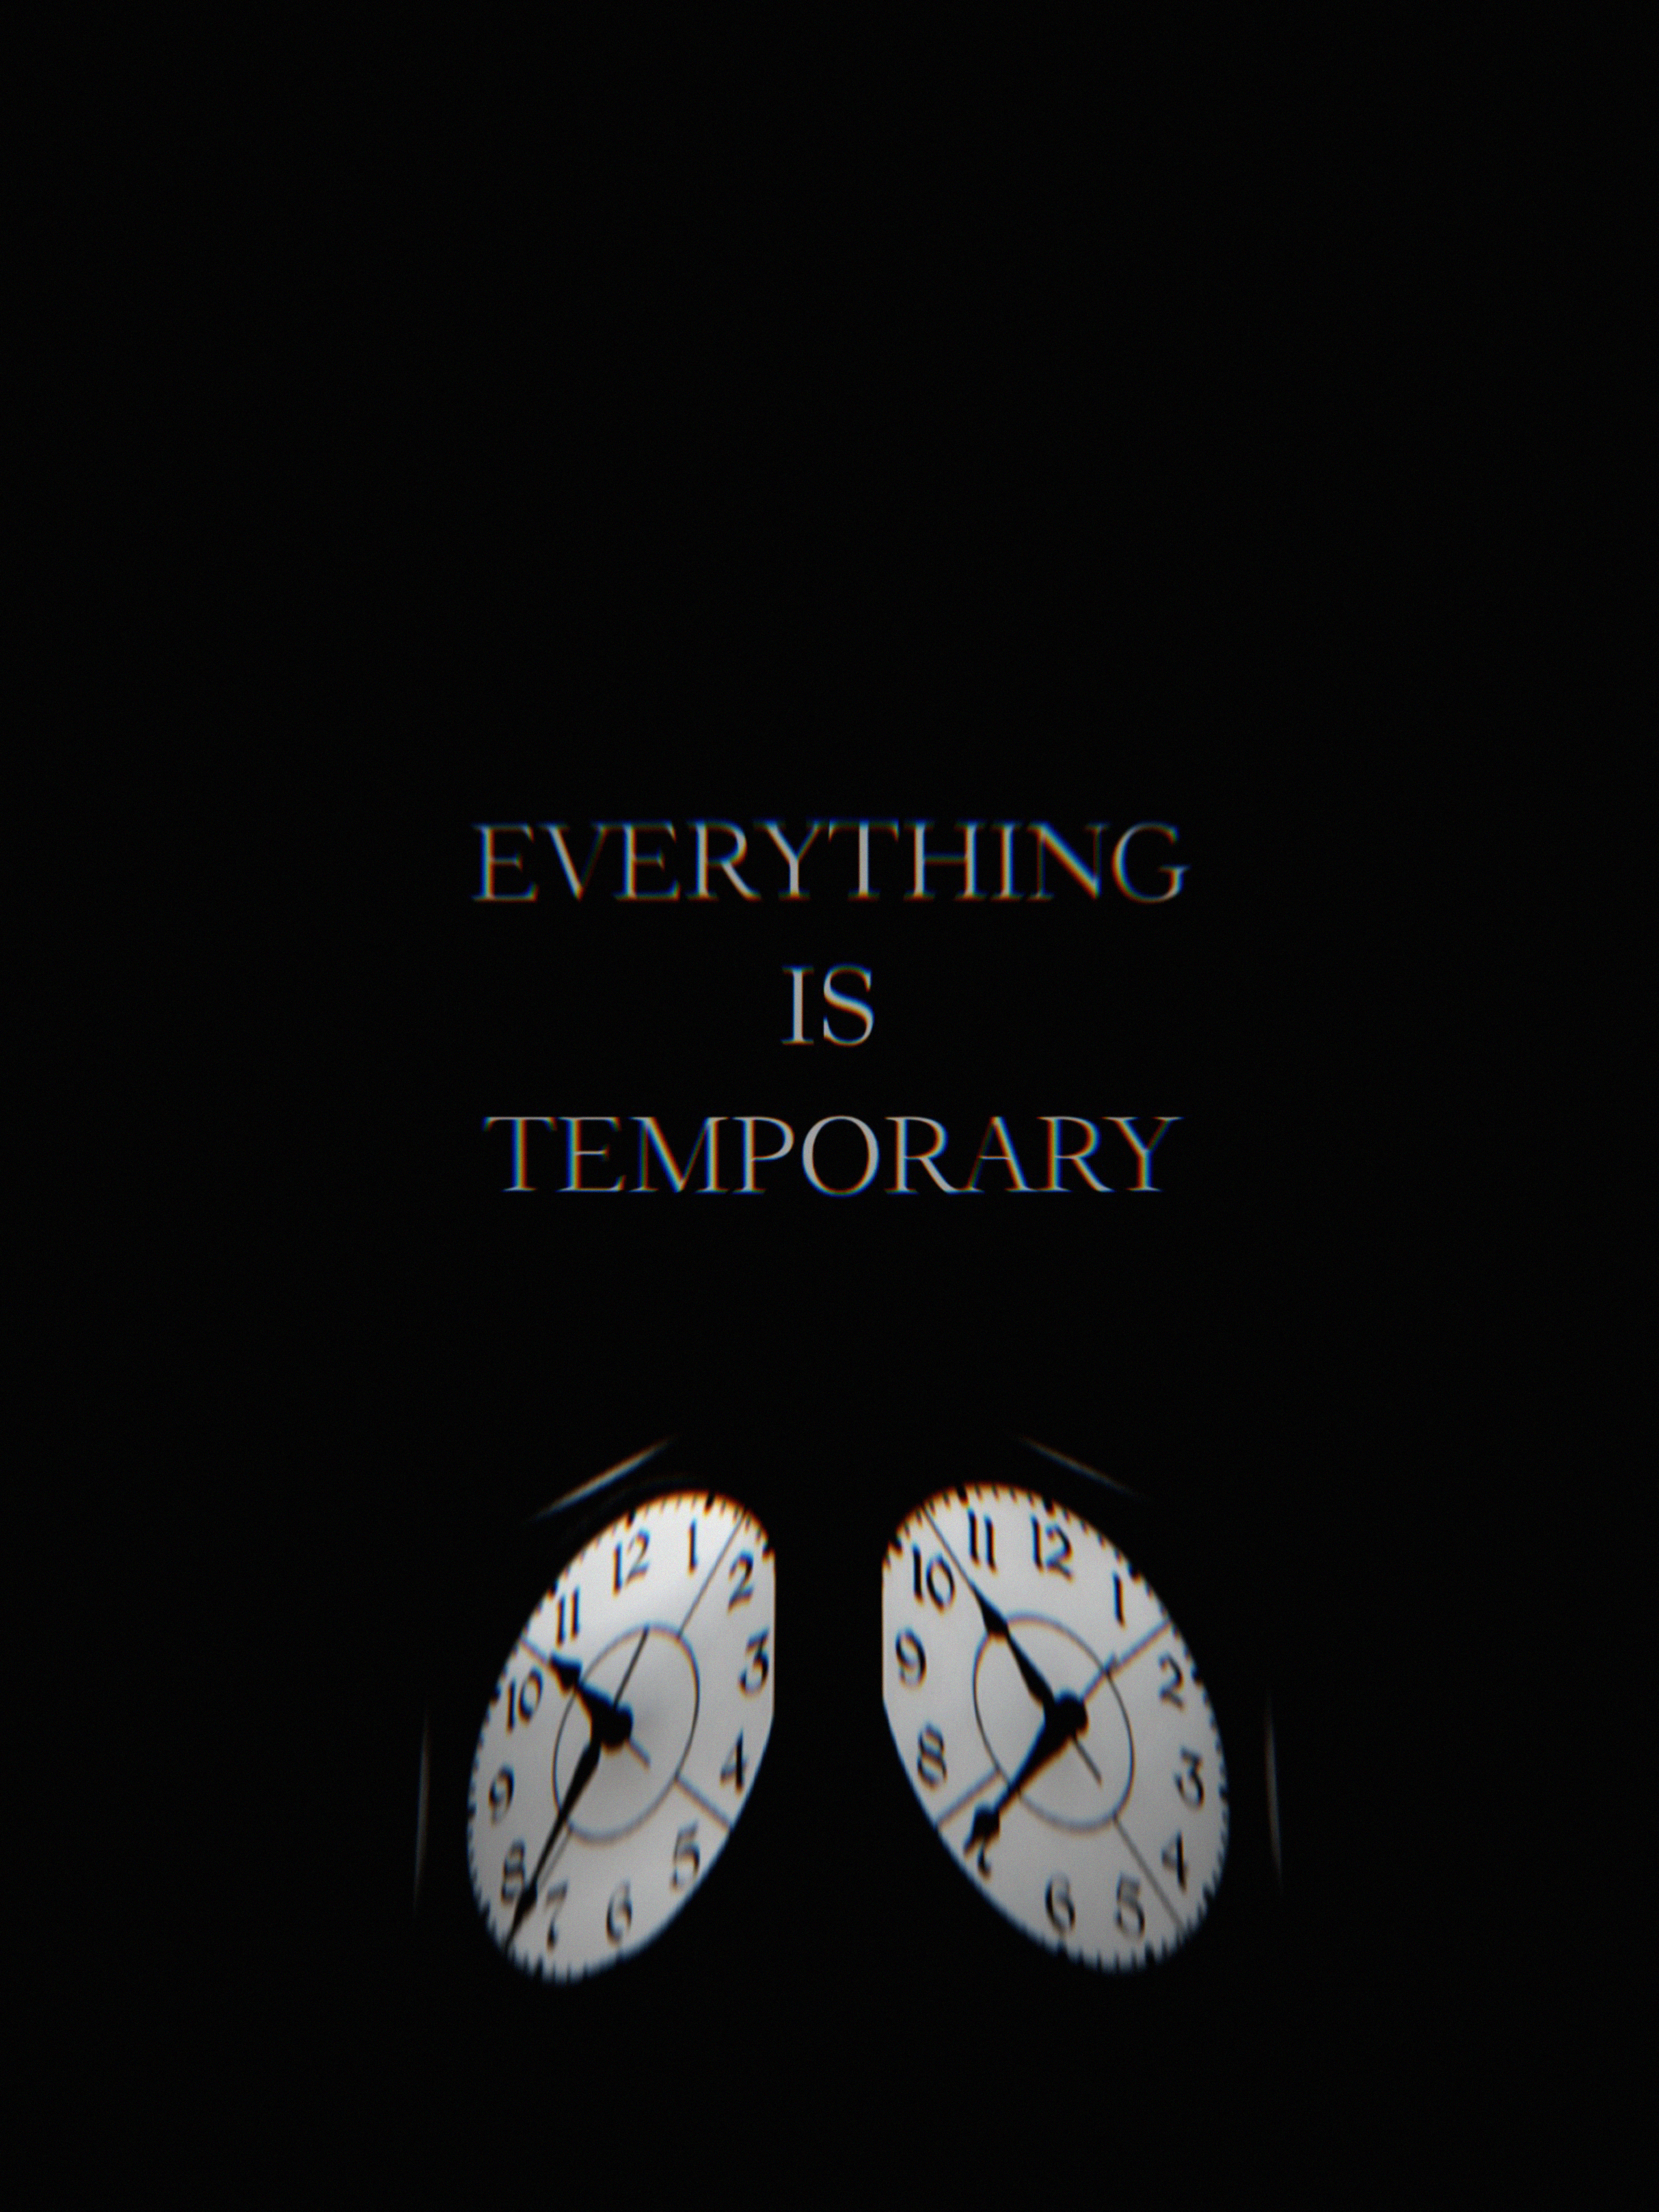 clock, words, life, glitch, time, it's time, temporary